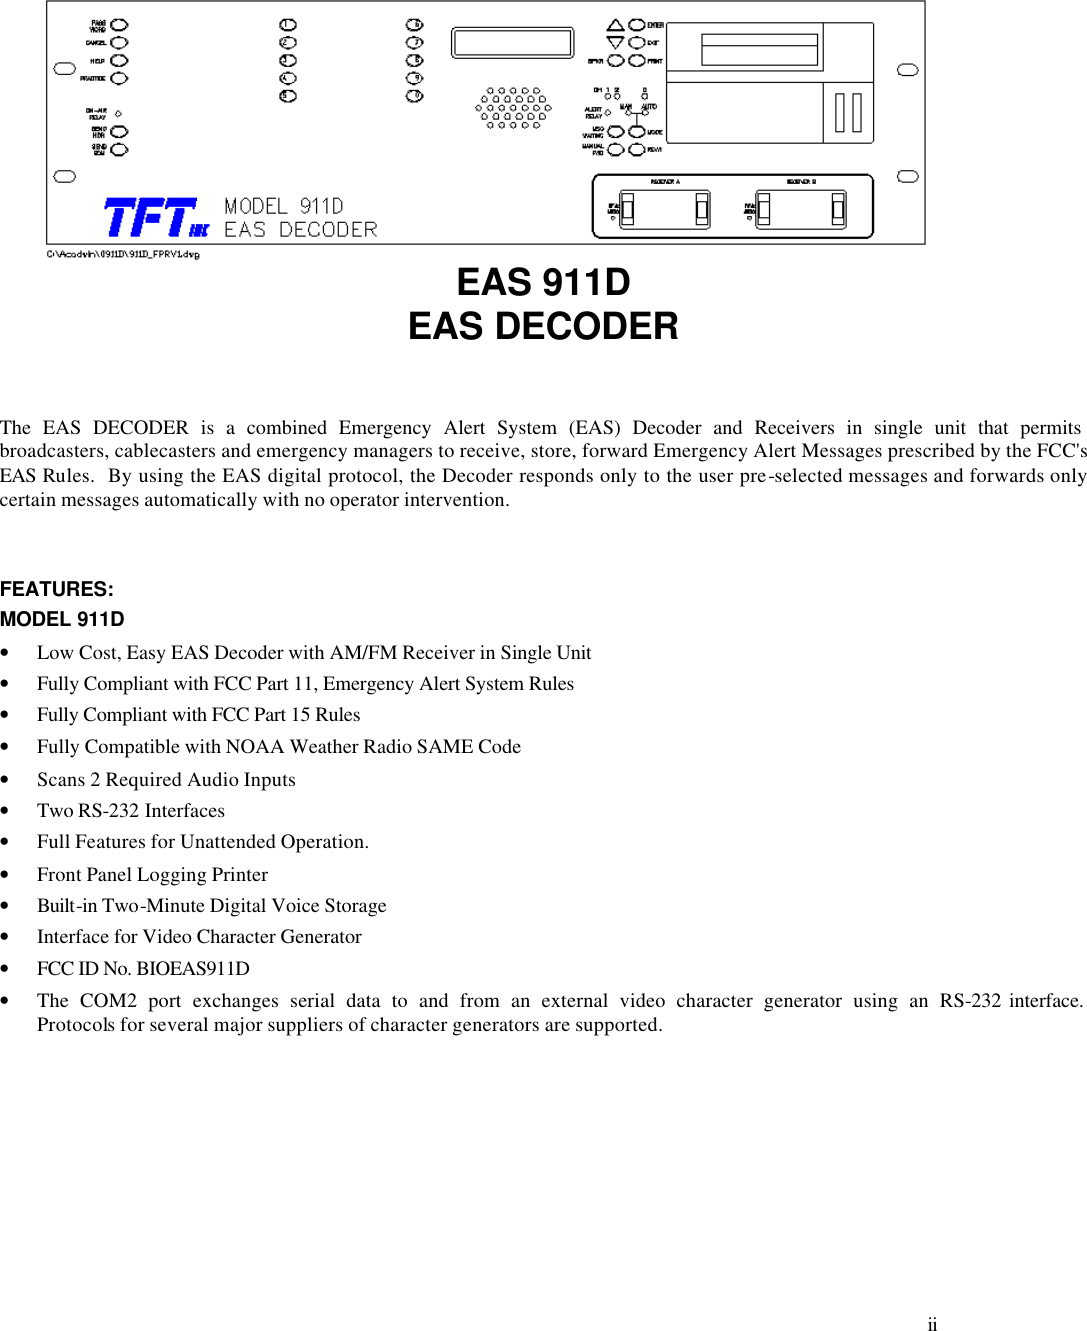     ii        EAS 911D EAS DECODER   The EAS DECODER is a combined Emergency Alert System (EAS) Decoder and Receivers in single unit that permits broadcasters, cablecasters and emergency managers to receive, store, forward Emergency Alert Messages prescribed by the FCC&apos;s EAS Rules.  By using the EAS digital protocol, the Decoder responds only to the user pre-selected messages and forwards only certain messages automatically with no operator intervention.    FEATURES: MODEL 911D • Low Cost, Easy EAS Decoder with AM/FM Receiver in Single Unit • Fully Compliant with FCC Part 11, Emergency Alert System Rules • Fully Compliant with FCC Part 15 Rules • Fully Compatible with NOAA Weather Radio SAME Code • Scans 2 Required Audio Inputs • Two RS-232 Interfaces  • Full Features for Unattended Operation. • Front Panel Logging Printer • Built-in Two-Minute Digital Voice Storage • Interface for Video Character Generator  • FCC ID No. BIOEAS911D • The COM2 port exchanges serial data to and from an external video character generator using an RS-232 interface.  Protocols for several major suppliers of character generators are supported.      